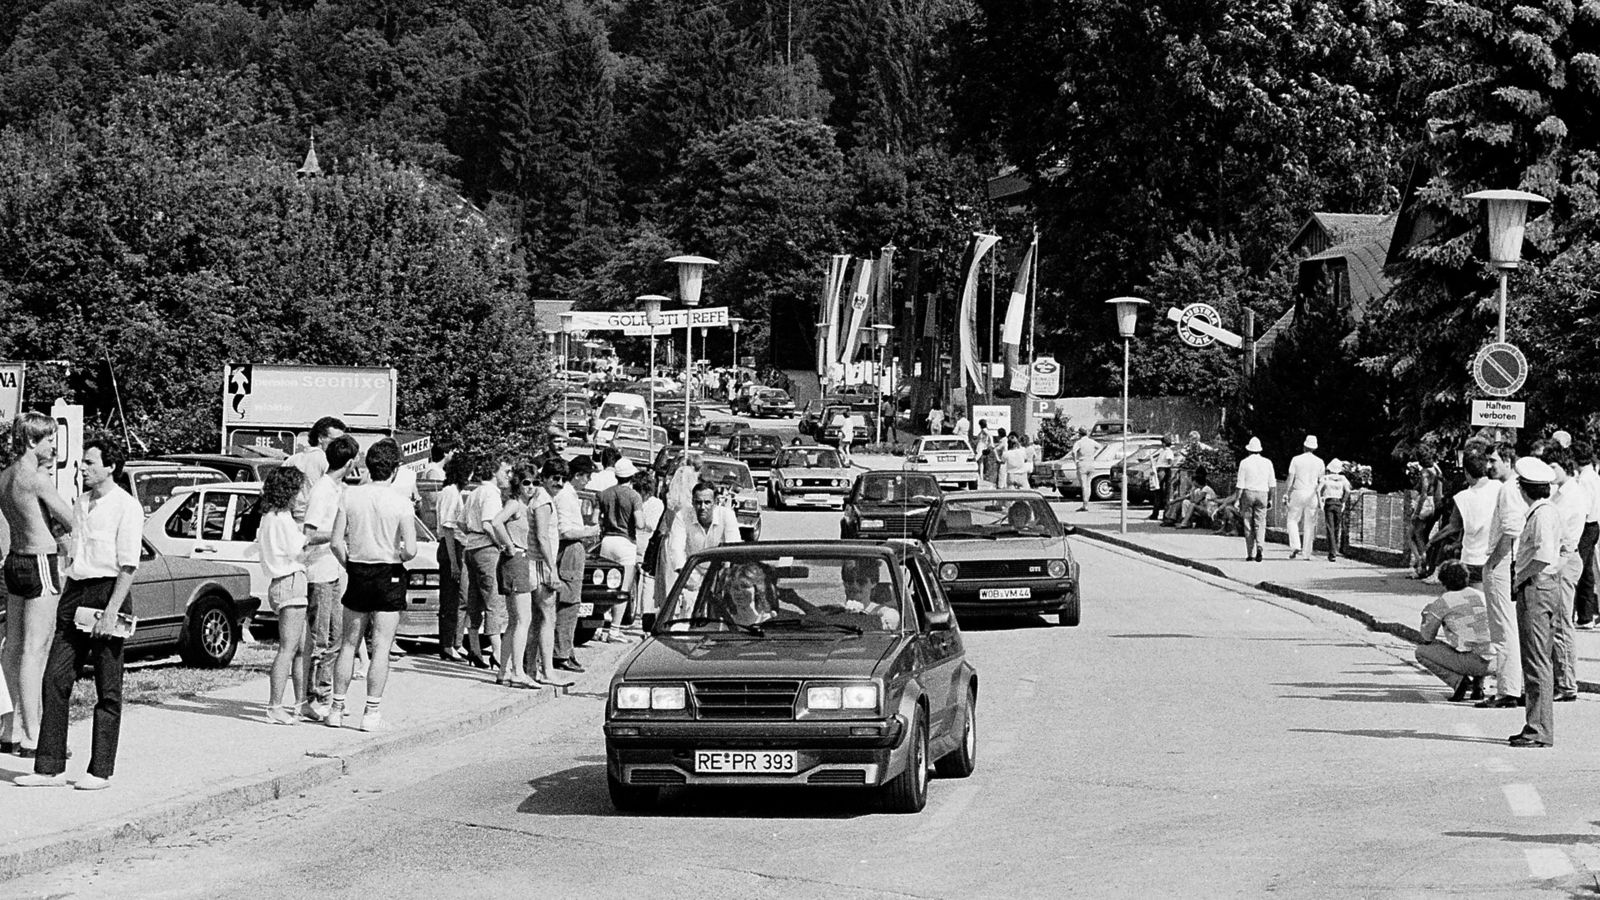 Story: Highlights from three decades of Wörthersee GTI meeting